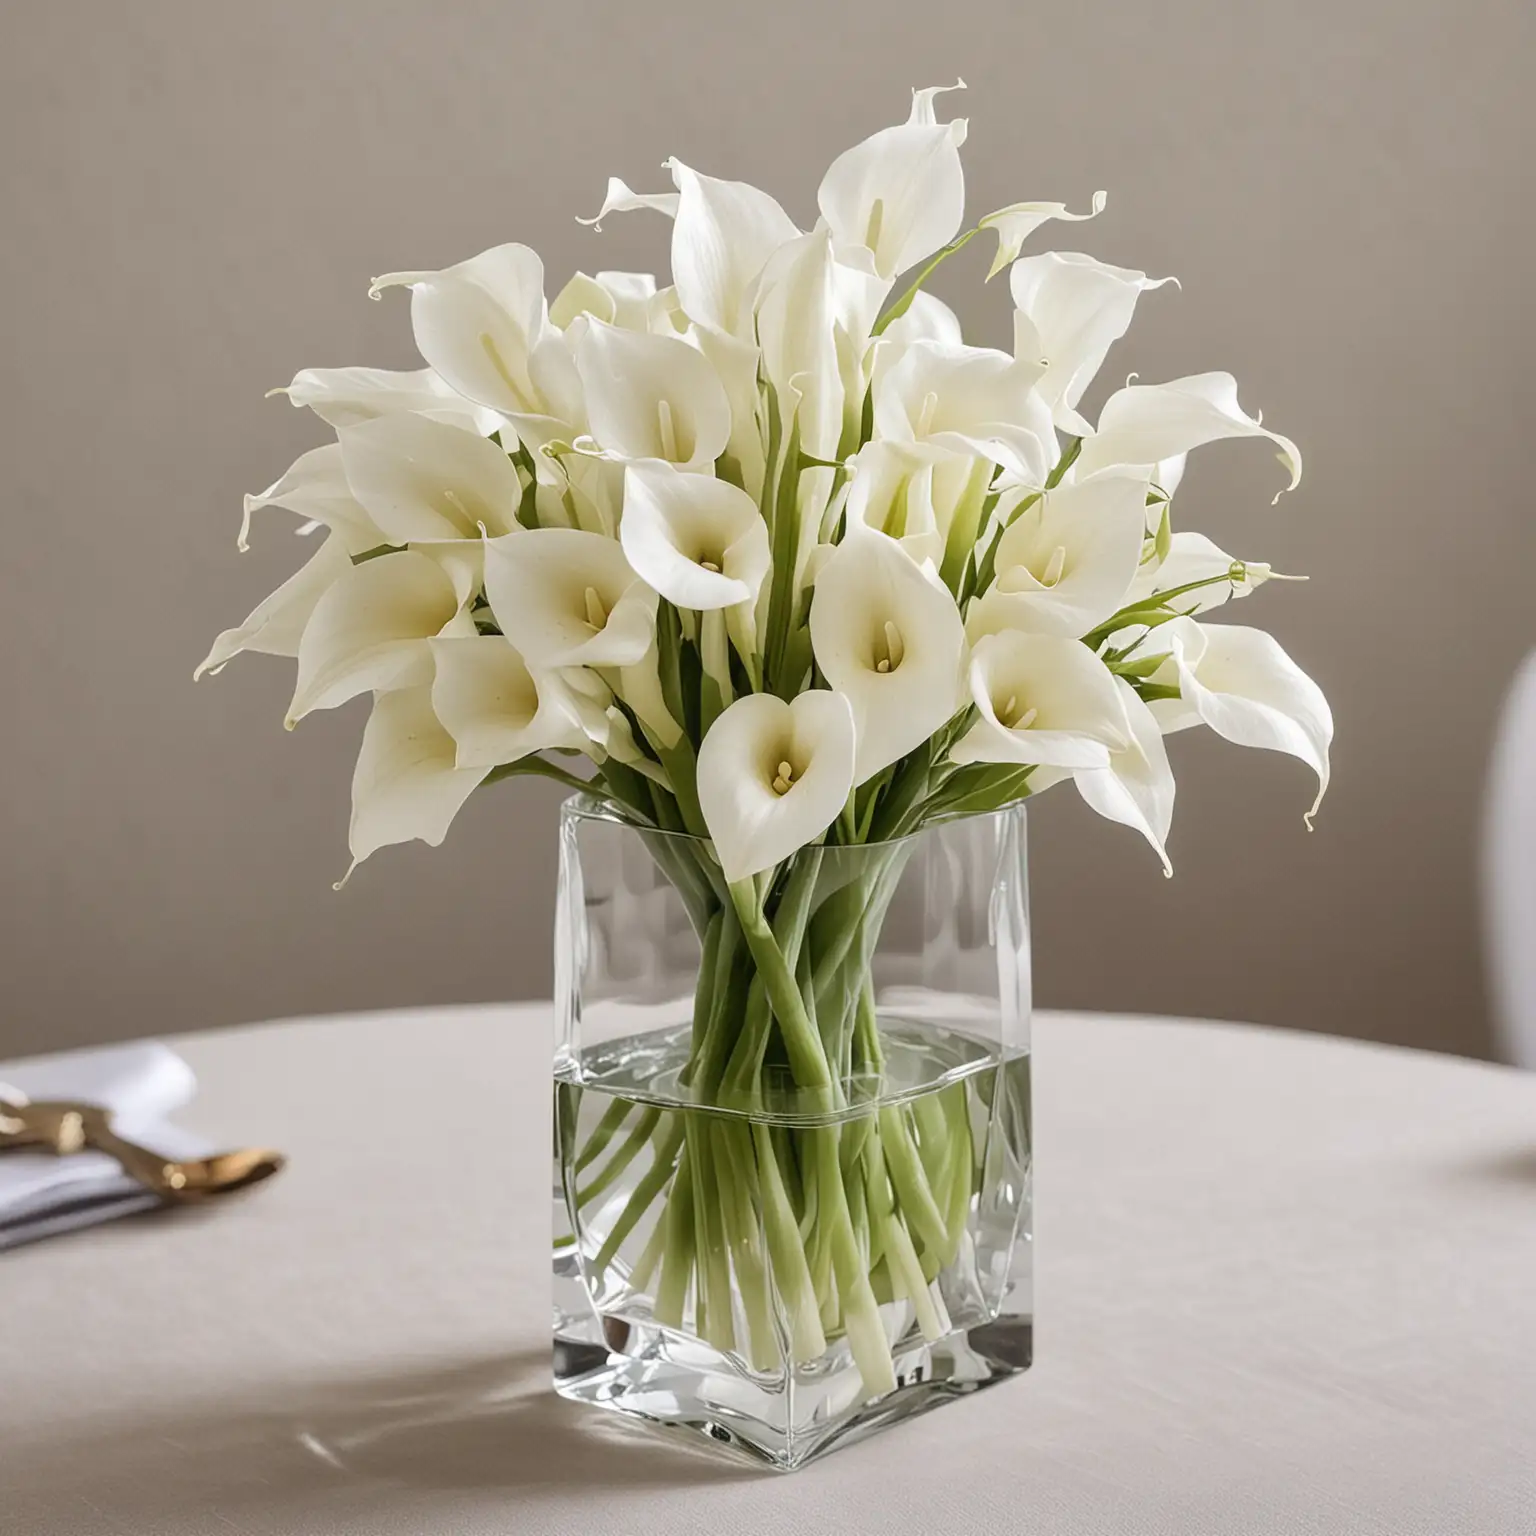 Modern-Summer-Wedding-Centerpiece-with-Geometric-Cleek-Vase-and-White-Calla-Lily-Bouquet